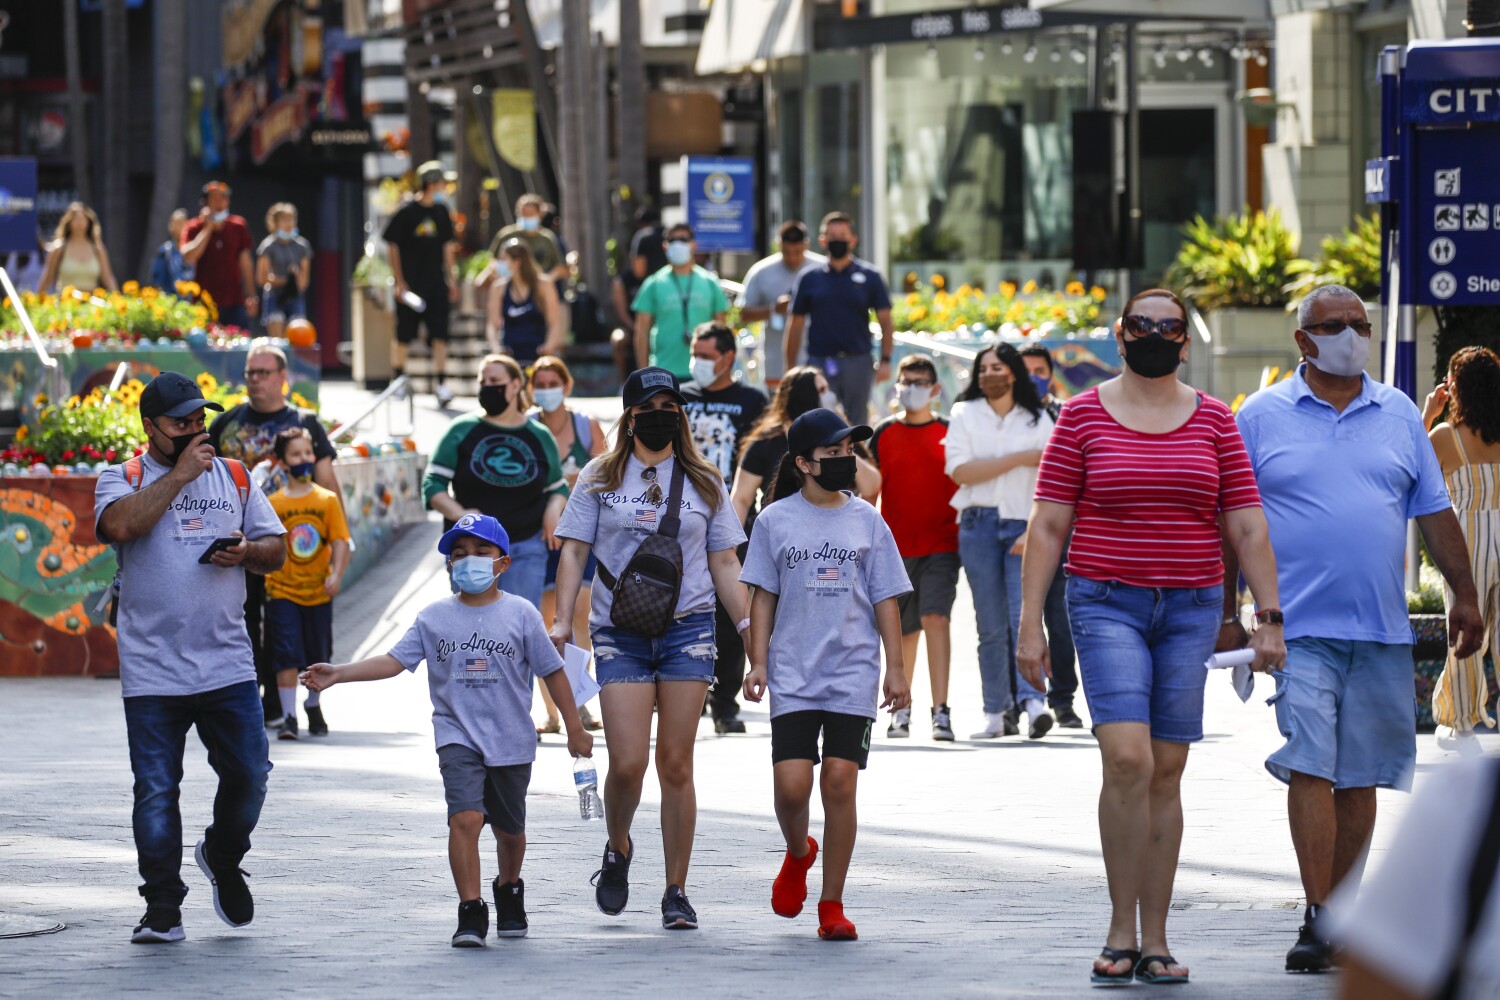 Universal Studios, Six Flags visitors may have to show COVID-19 vaccine proof or test